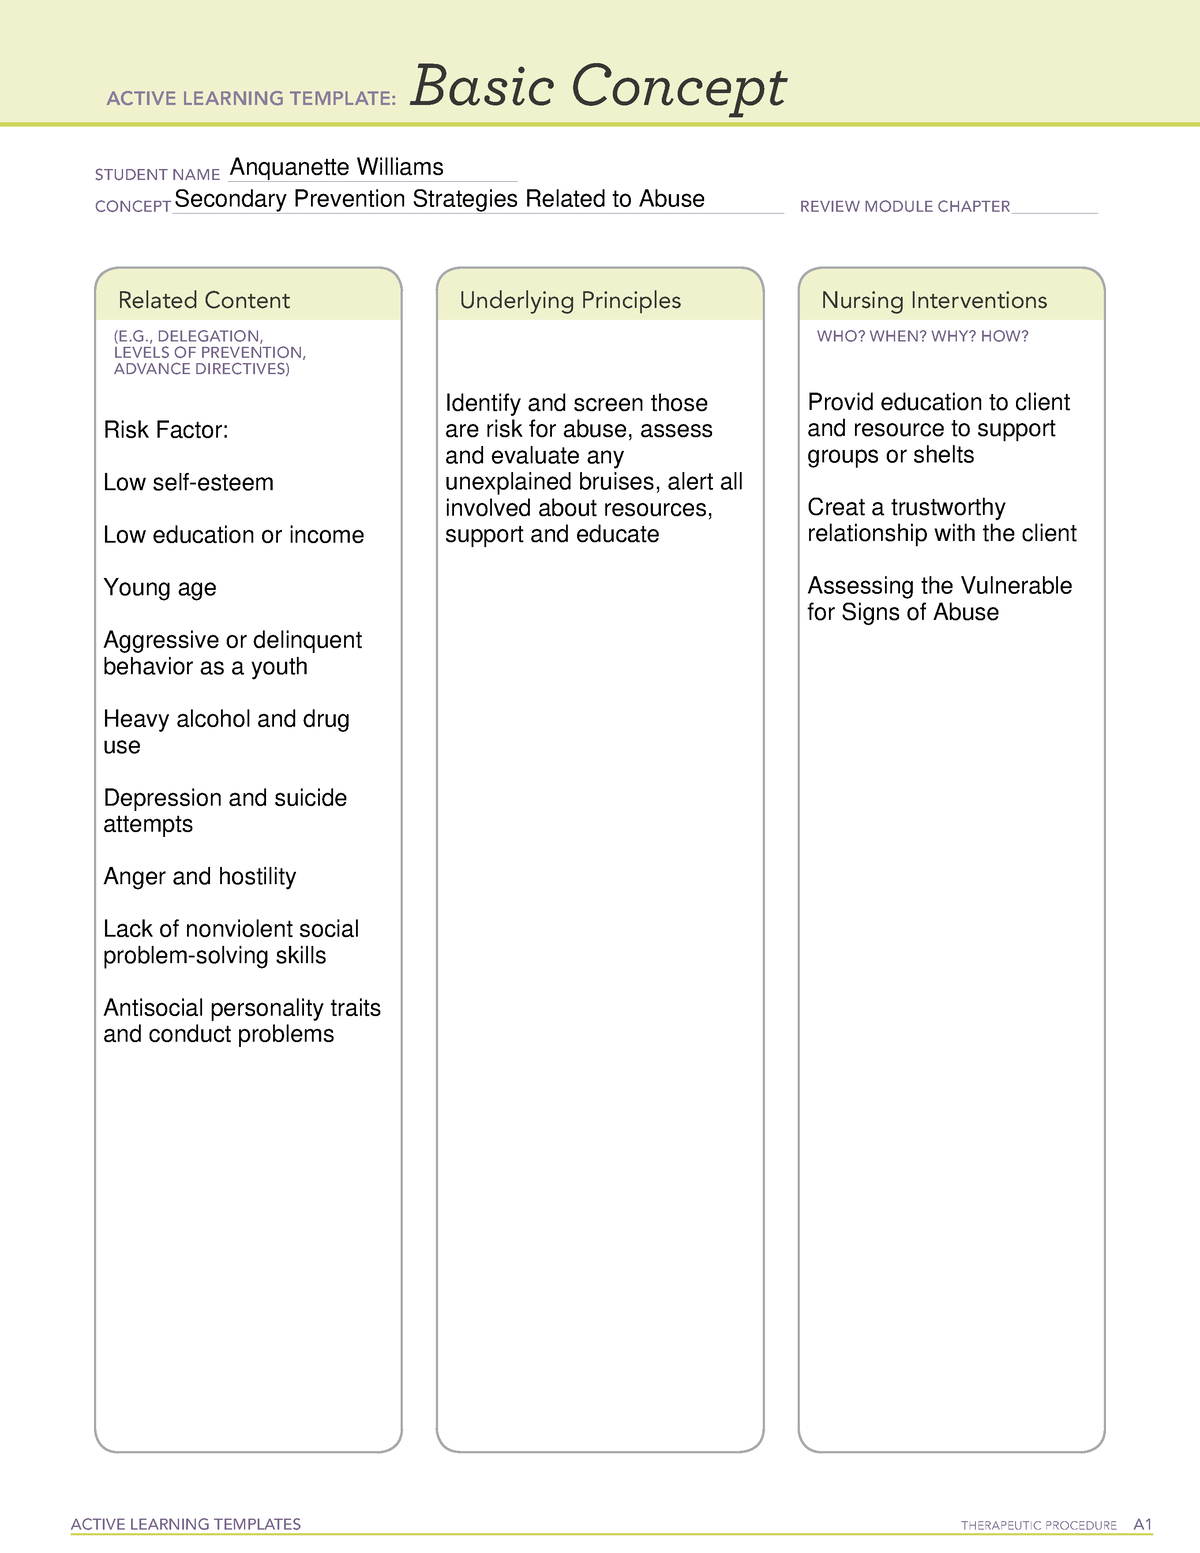 Basic Concept Ati Work Active Learning Templates Basic Concept Images